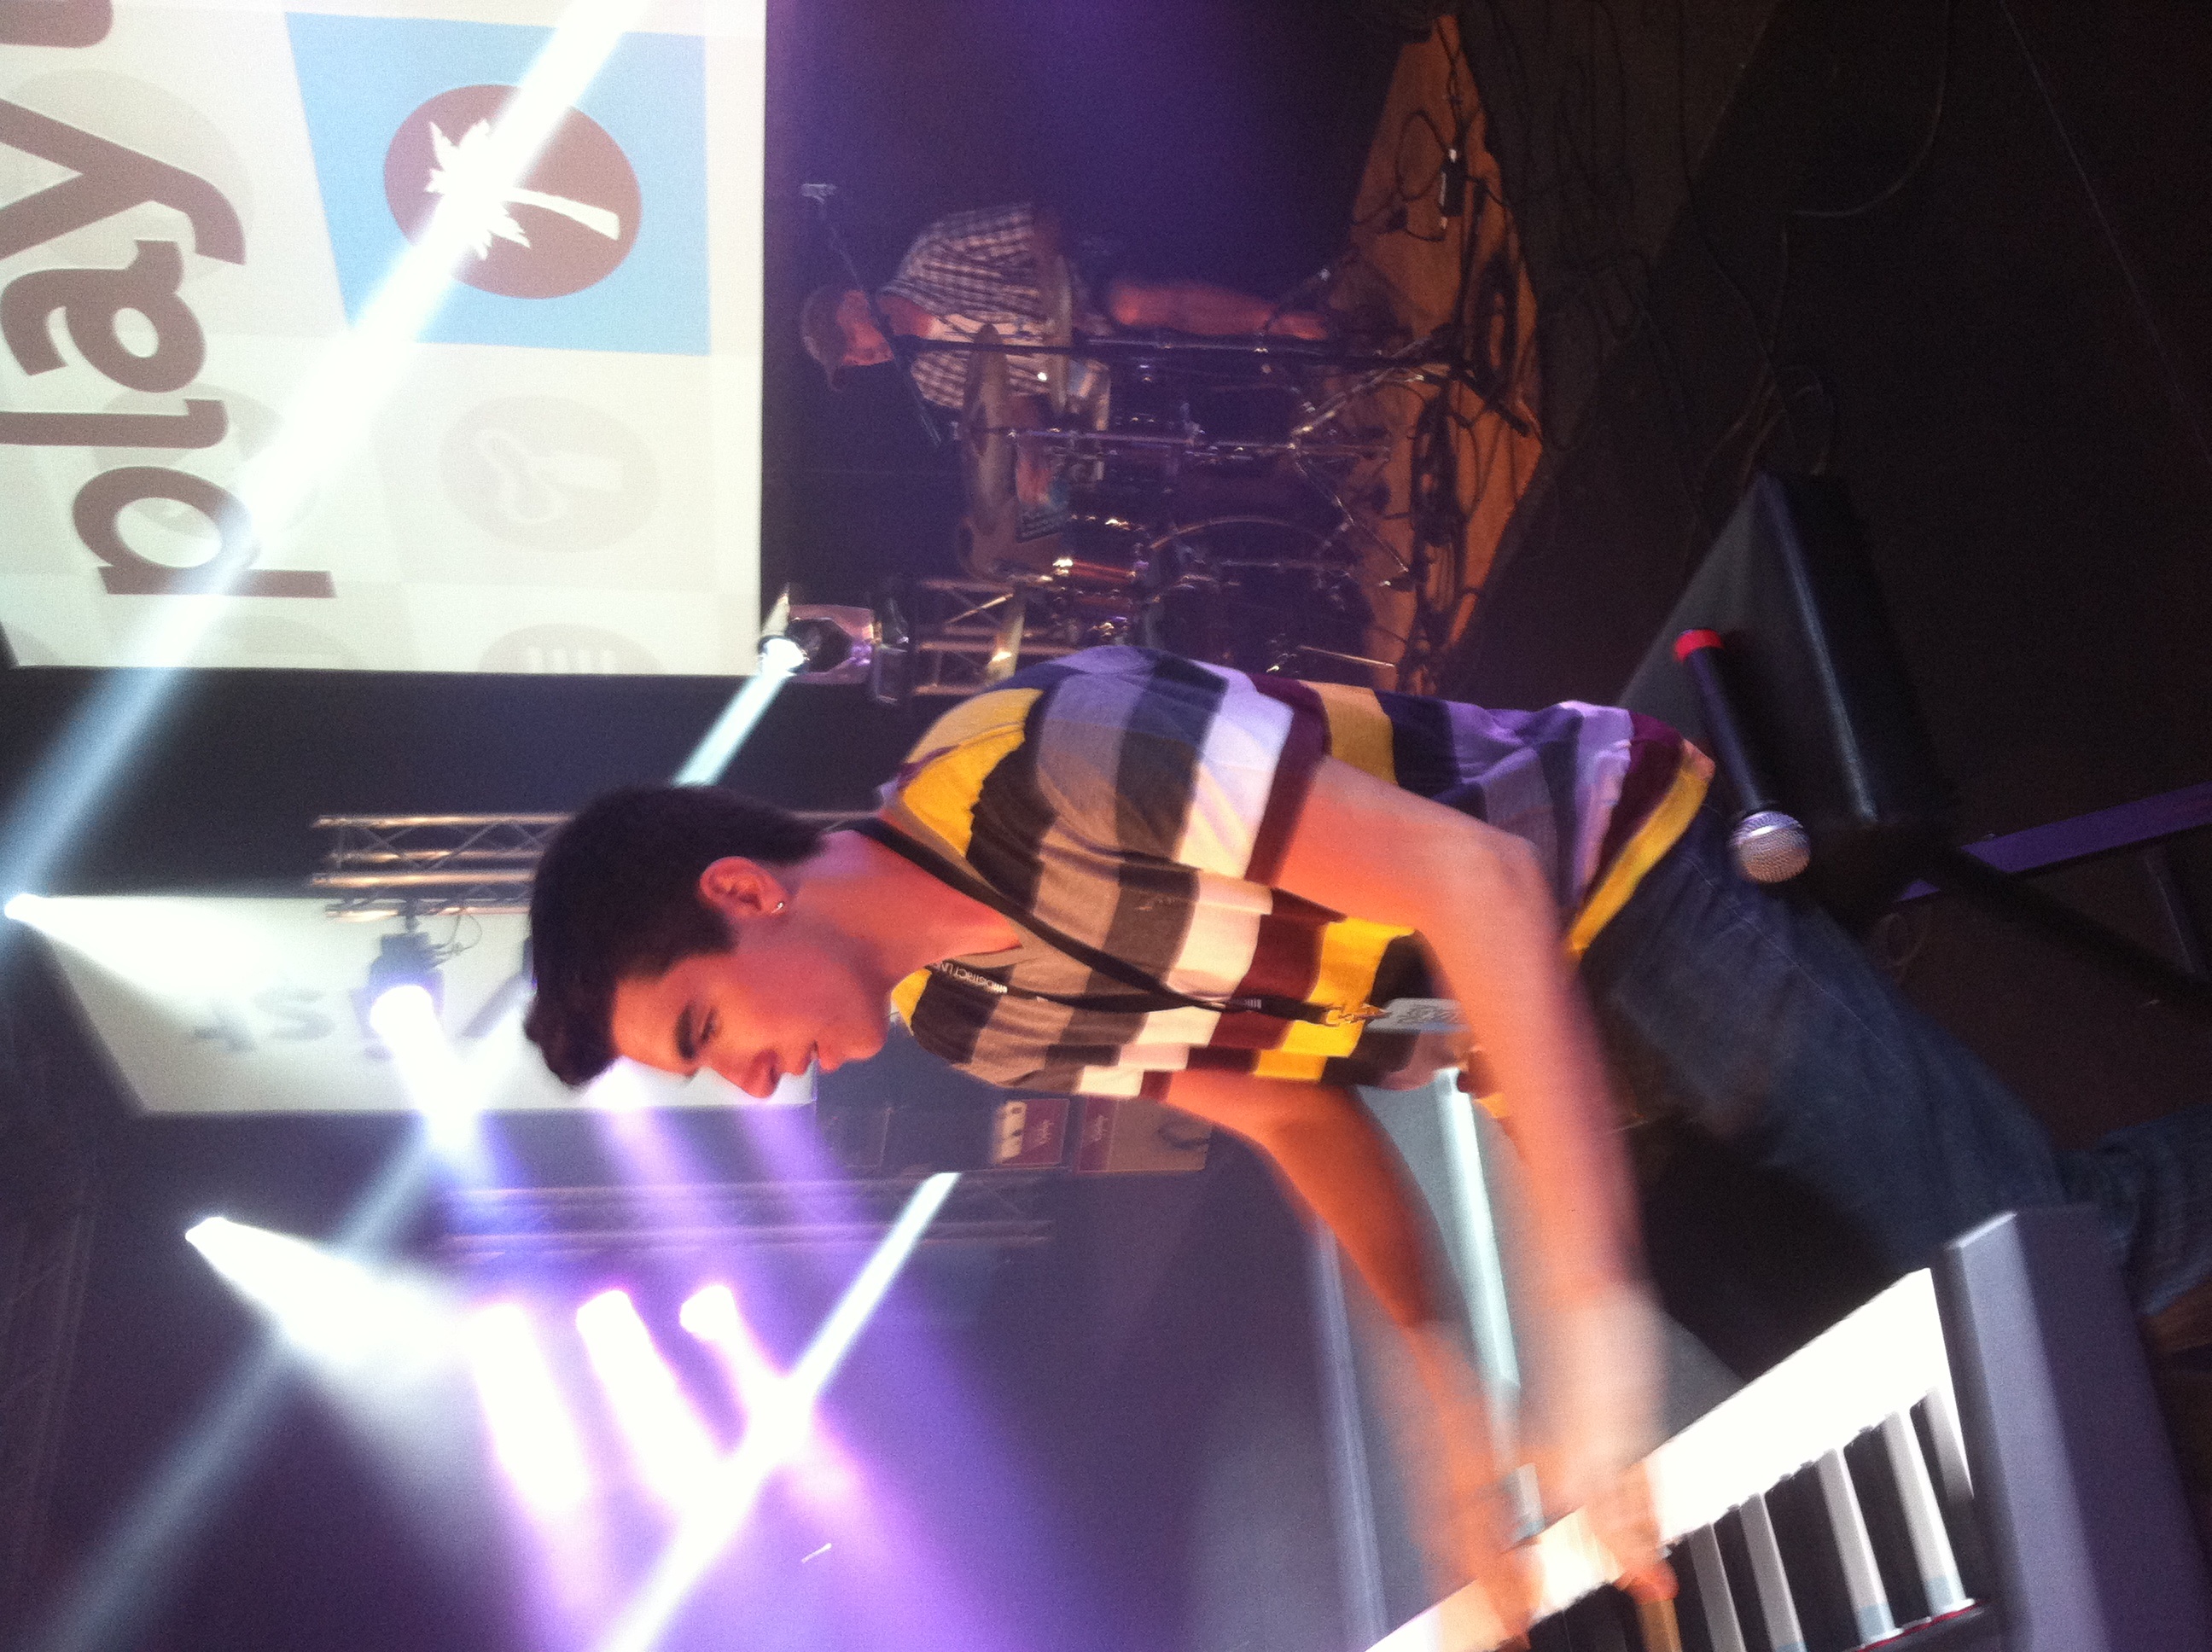 Christopher McGinnis LIVE in concert 2013 at Playlist Live, Orlando Florida